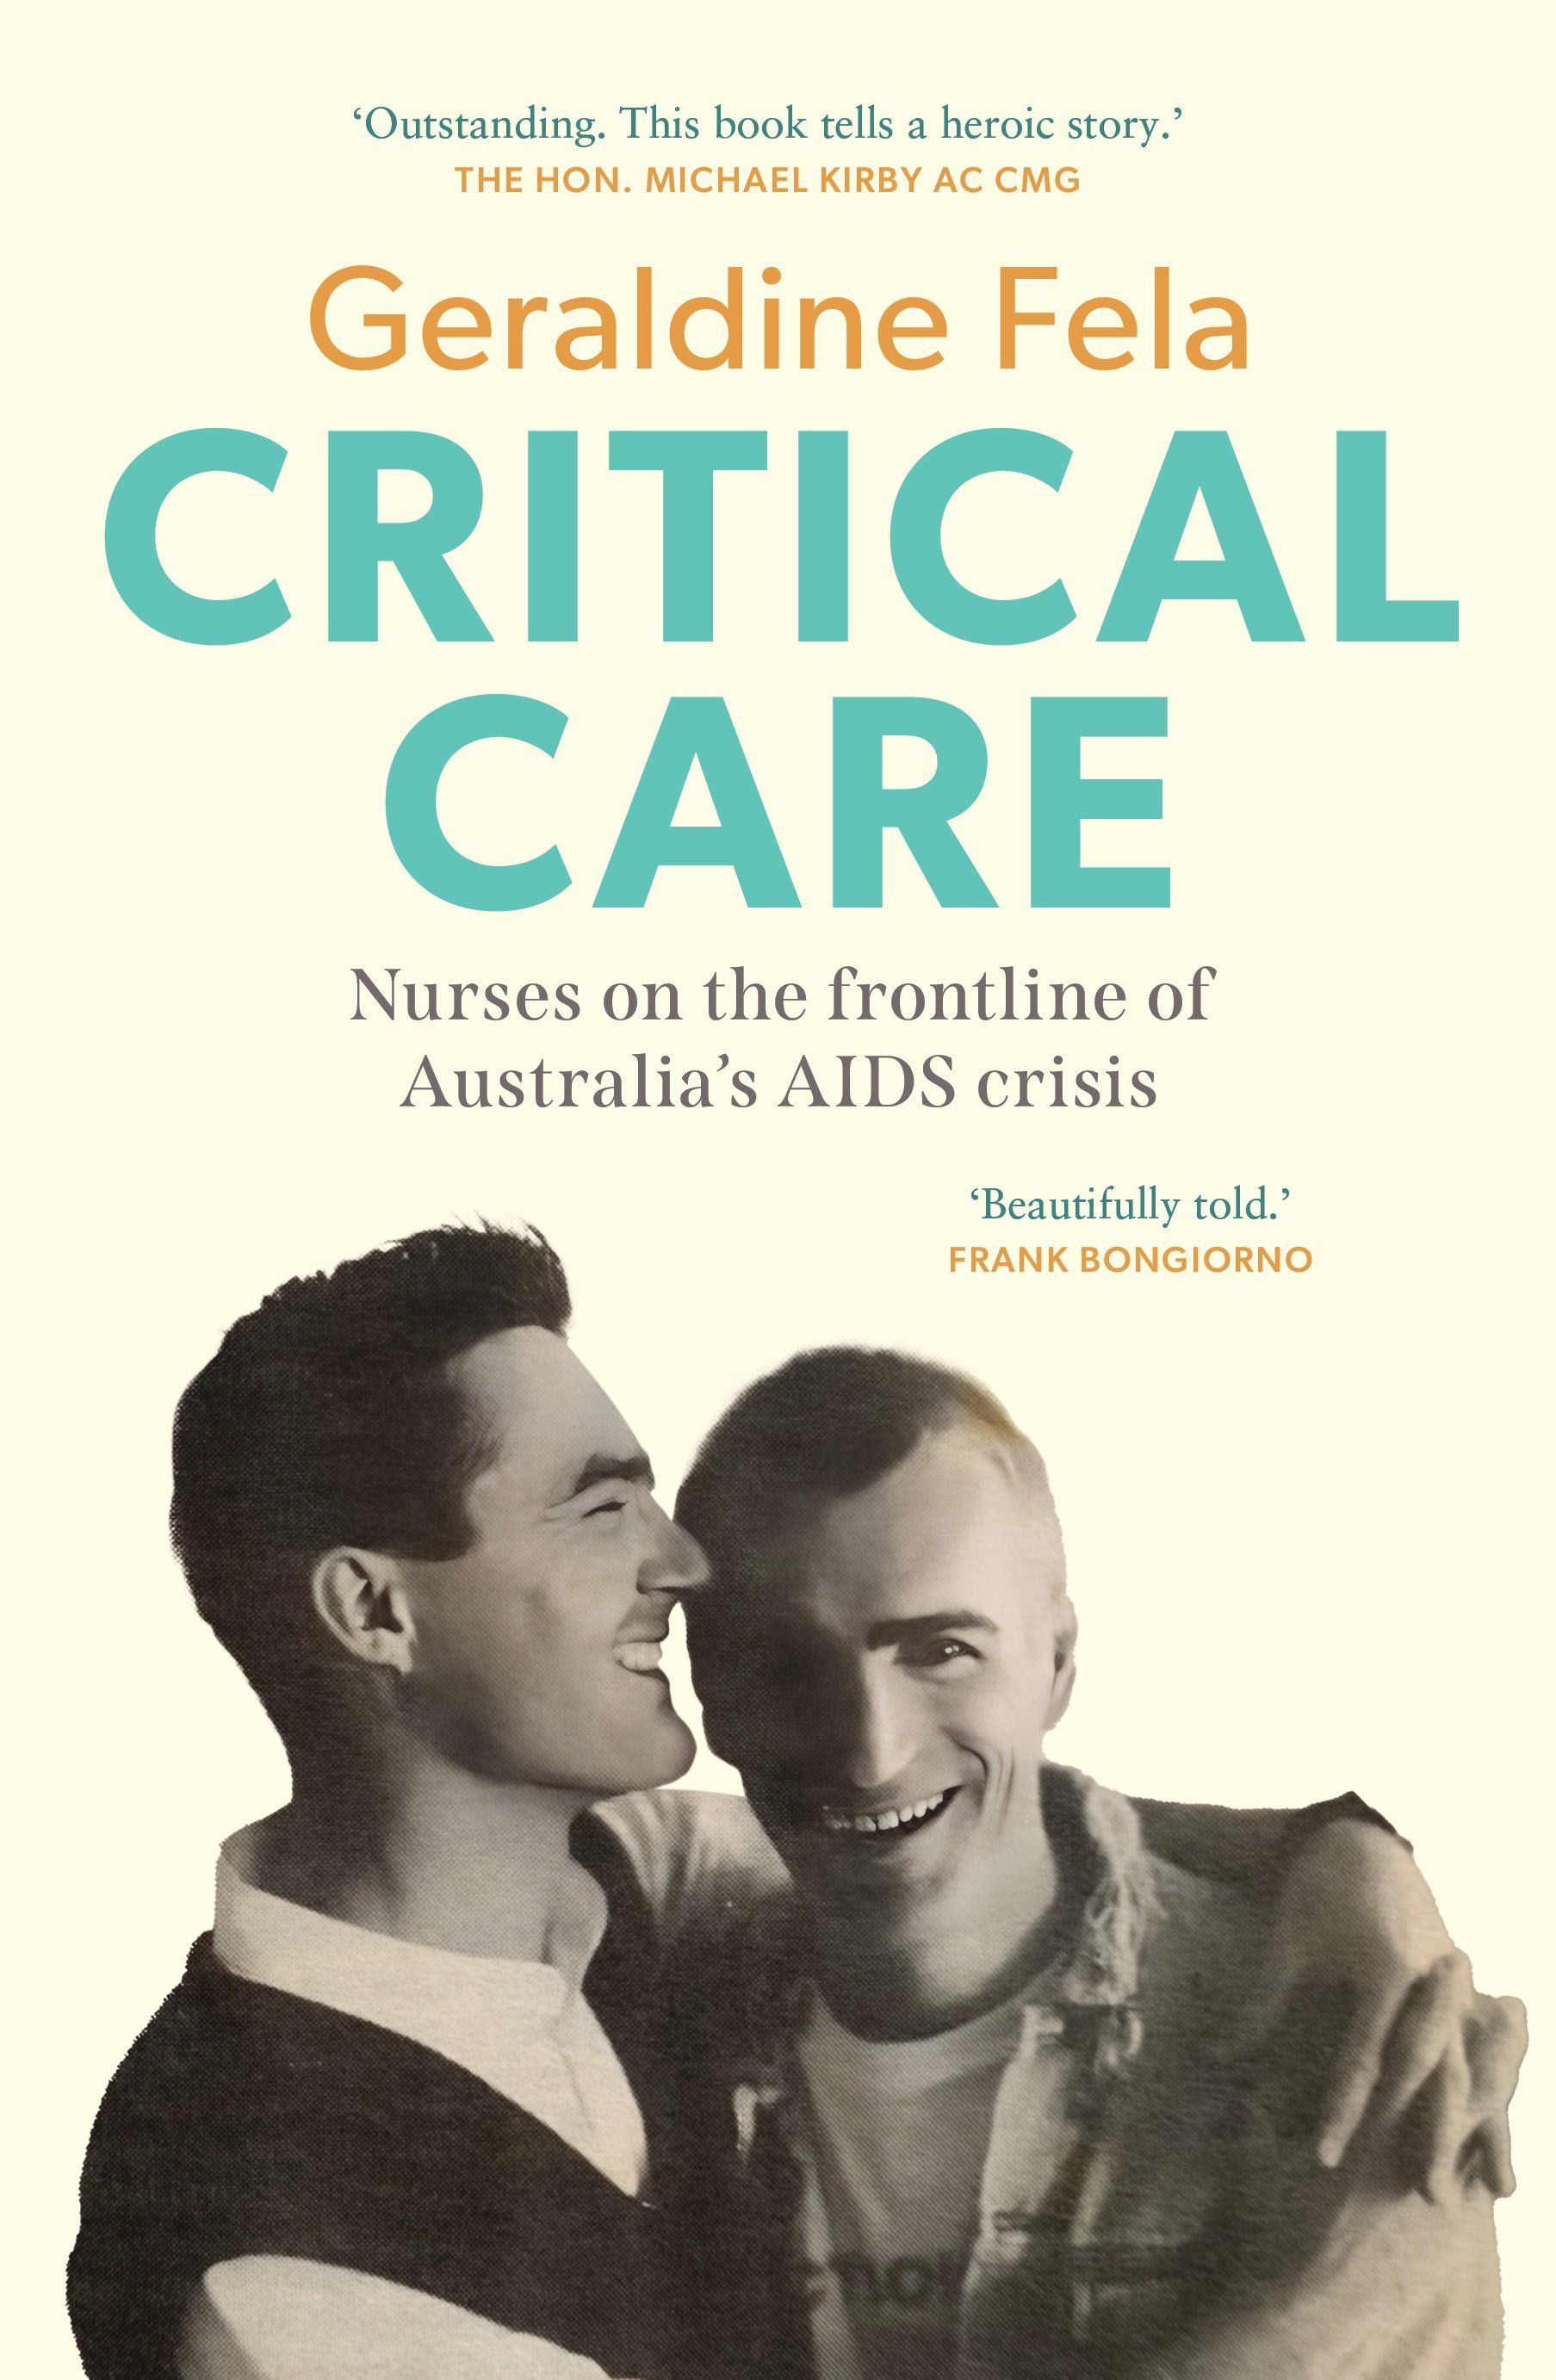 A book cover with a black and white photo of two young men smiling and embracing, on a pale yellow background